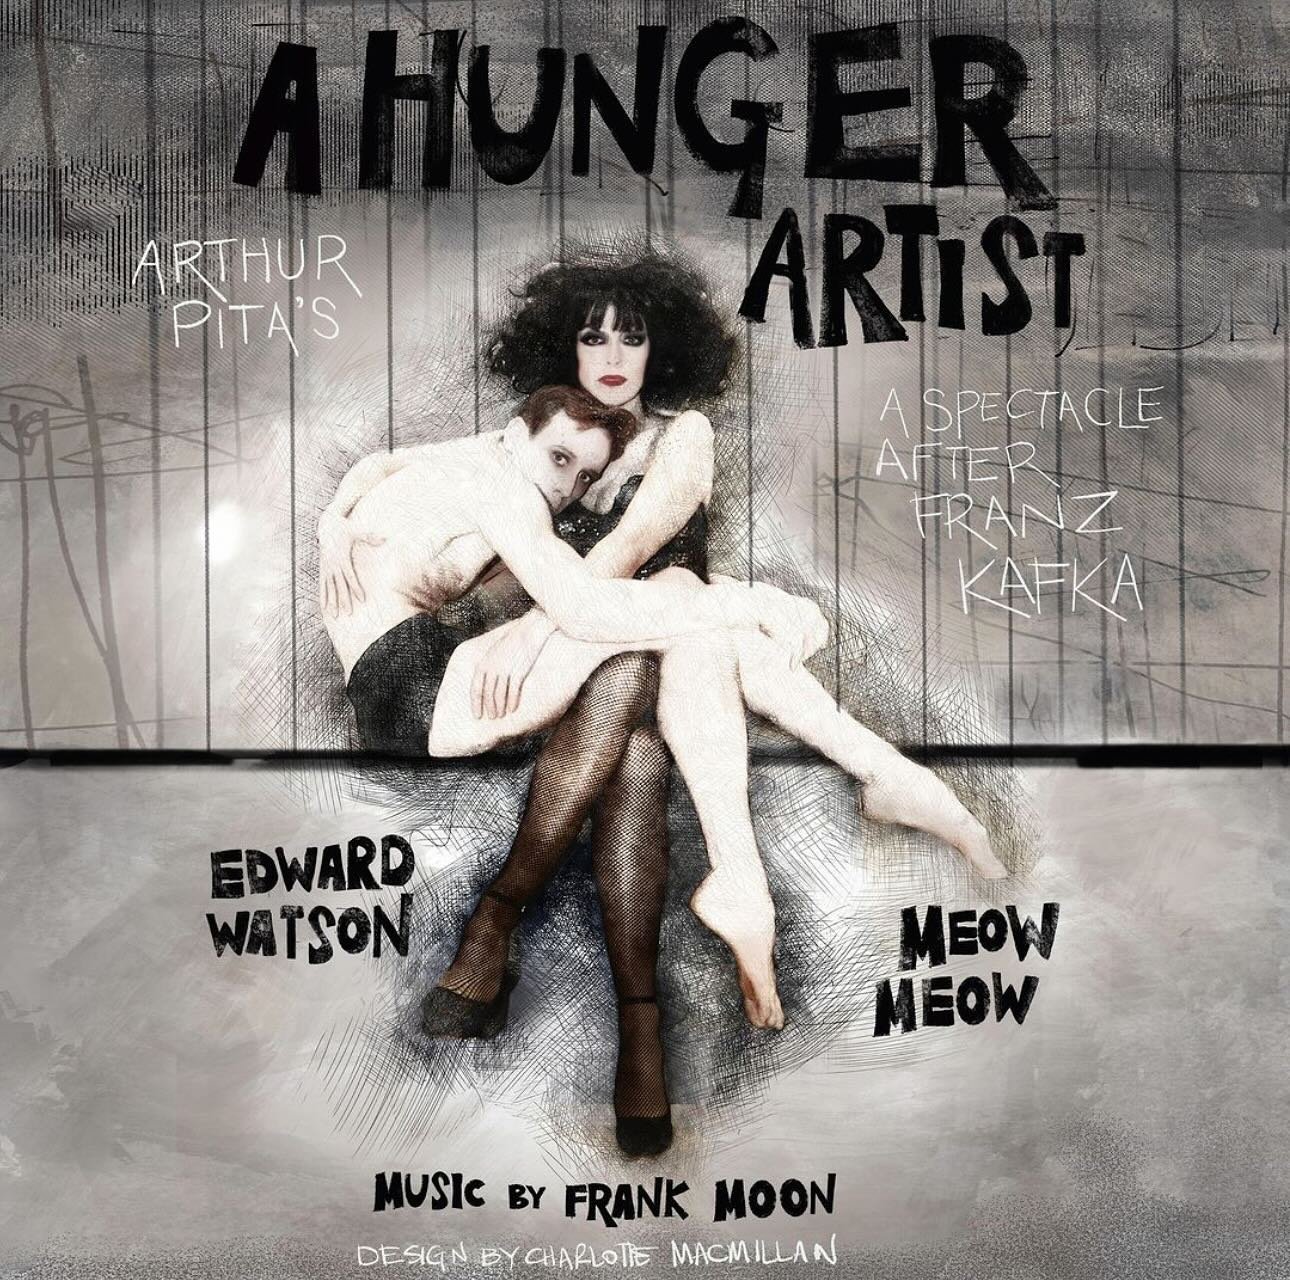 HE&rsquo;S BACK &bull; Delighted to announce @edwatson11 is back on stage, and back collaborating with the brilliant @arthurpita &bull; A HUNGER ARTIST featuring @edwatson11 @meowtopia will premiere  3, 4, 5 June 2024 @artsattheofs as part of @oxford